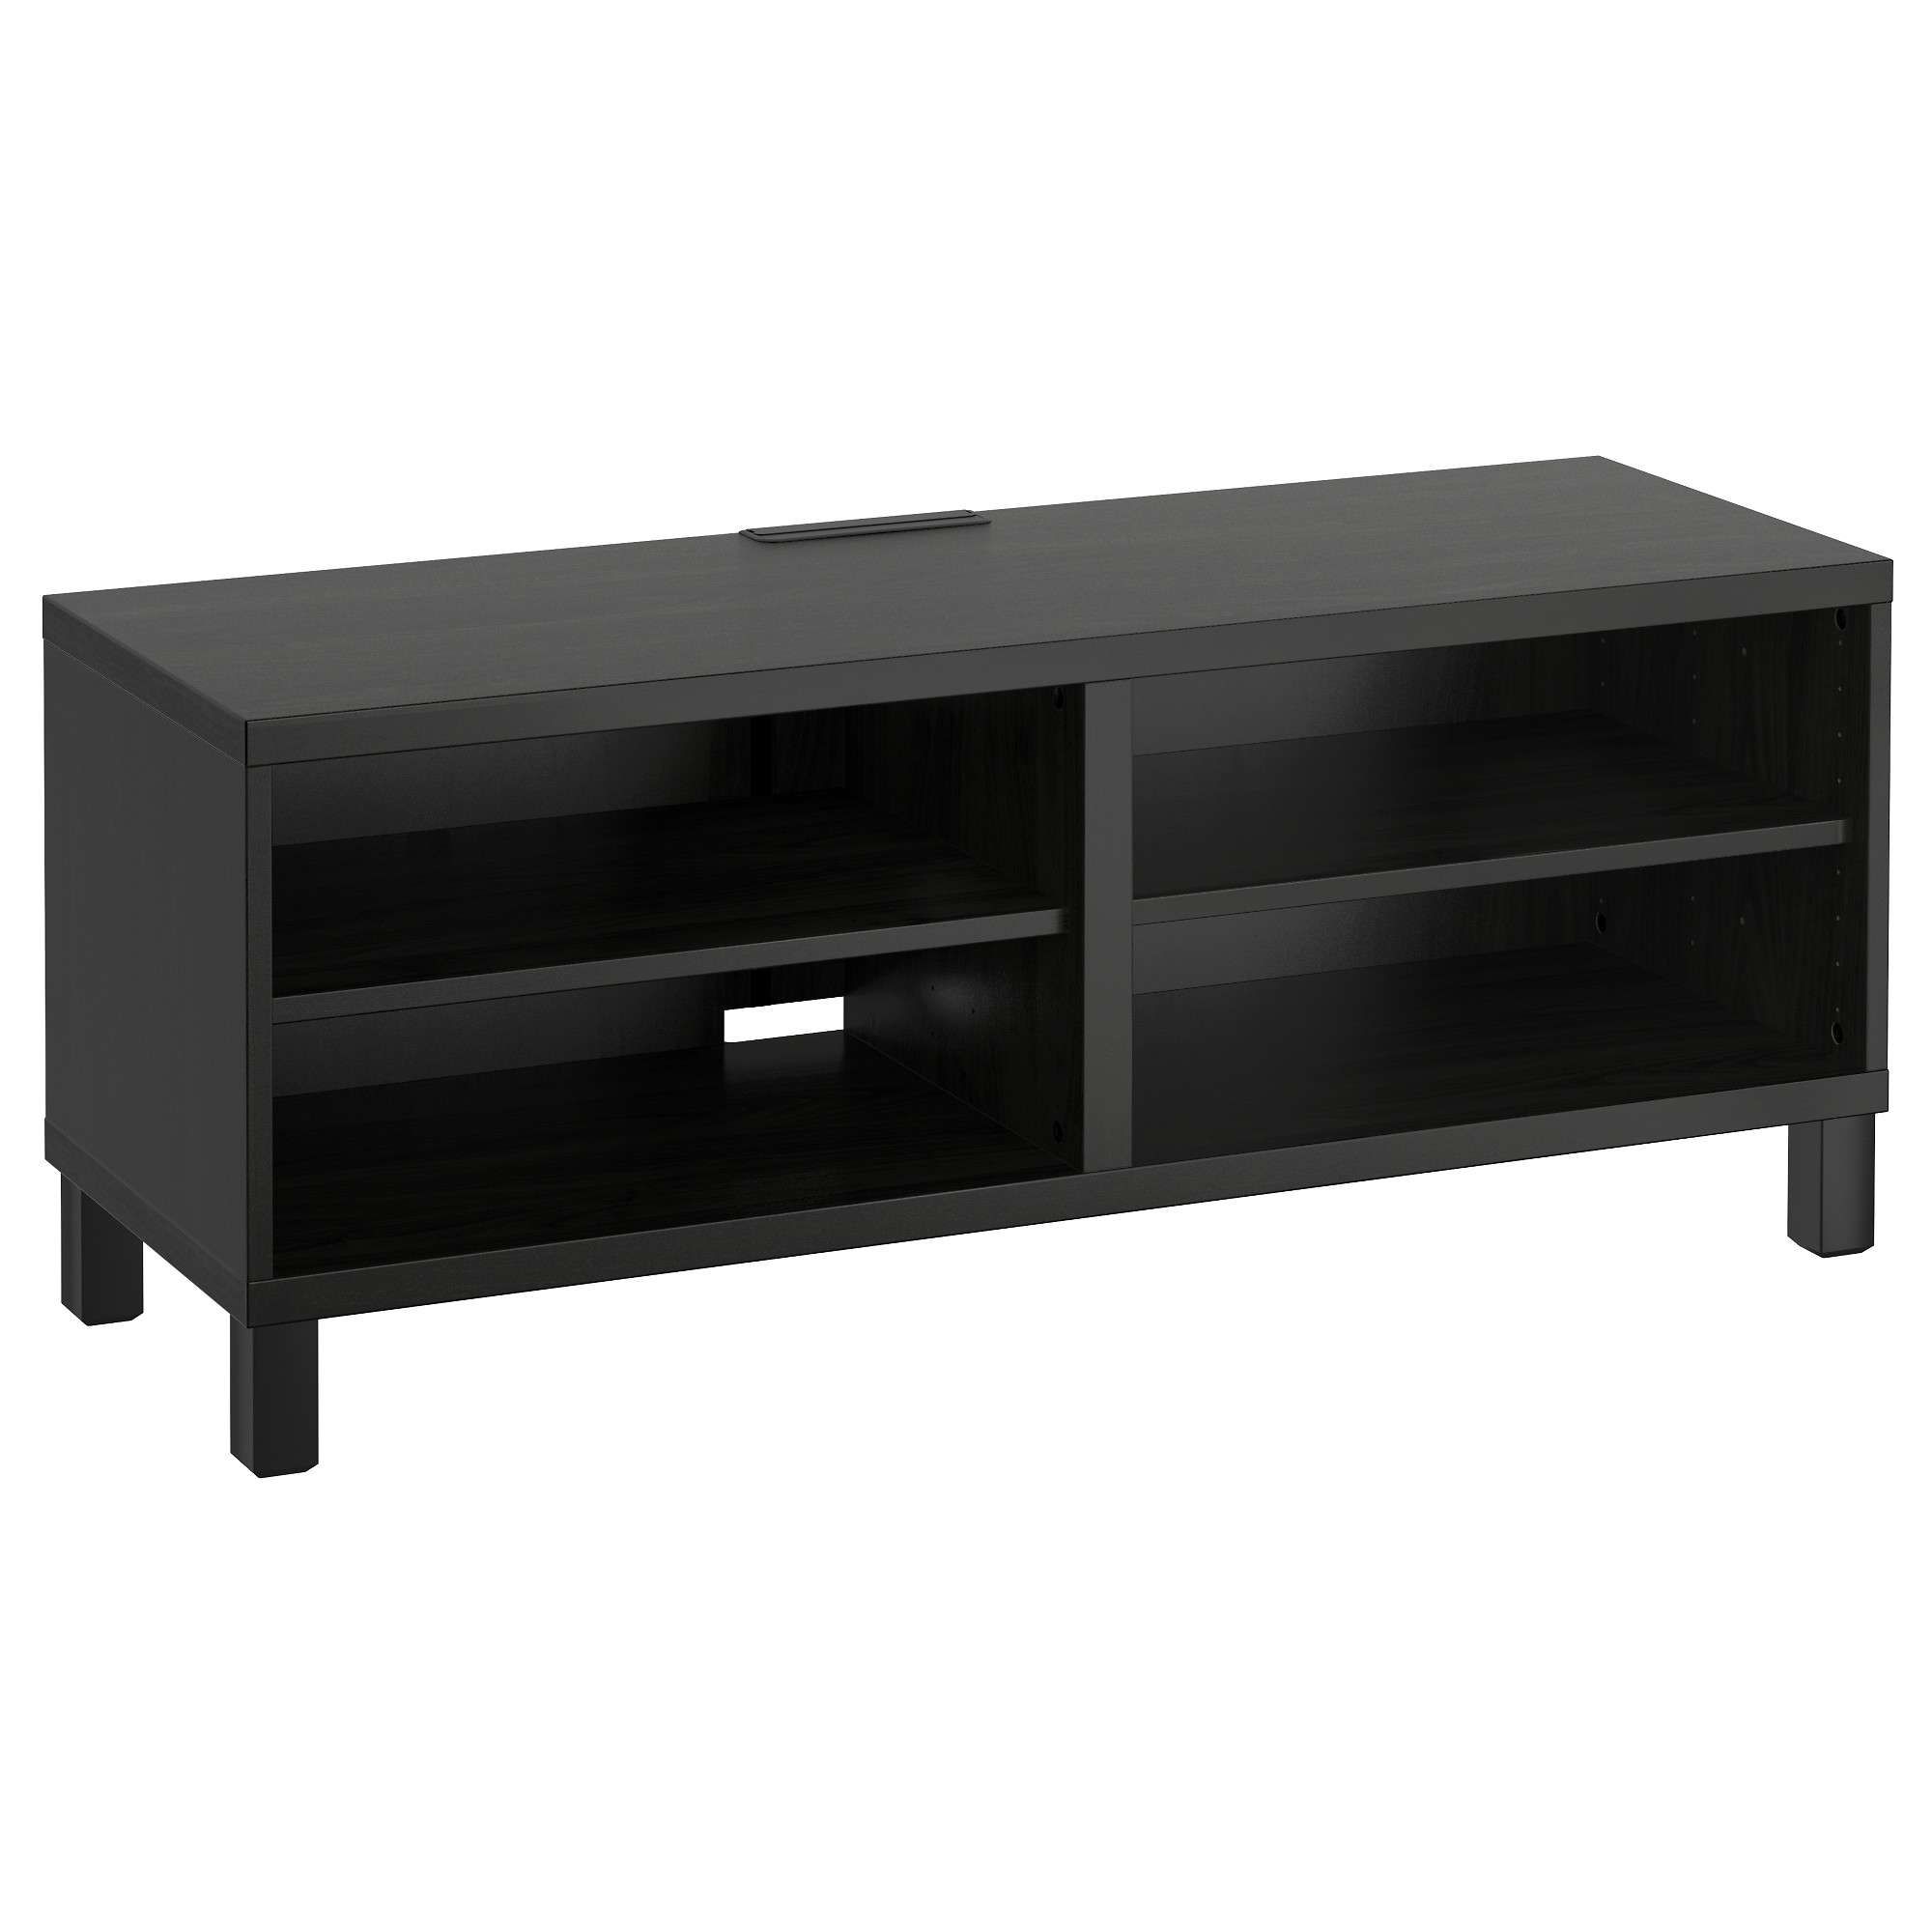 Large Tv Stands & Entertainment Centers – Ikea Within 24 Inch Deep Tv Stands (Gallery 1 of 15)